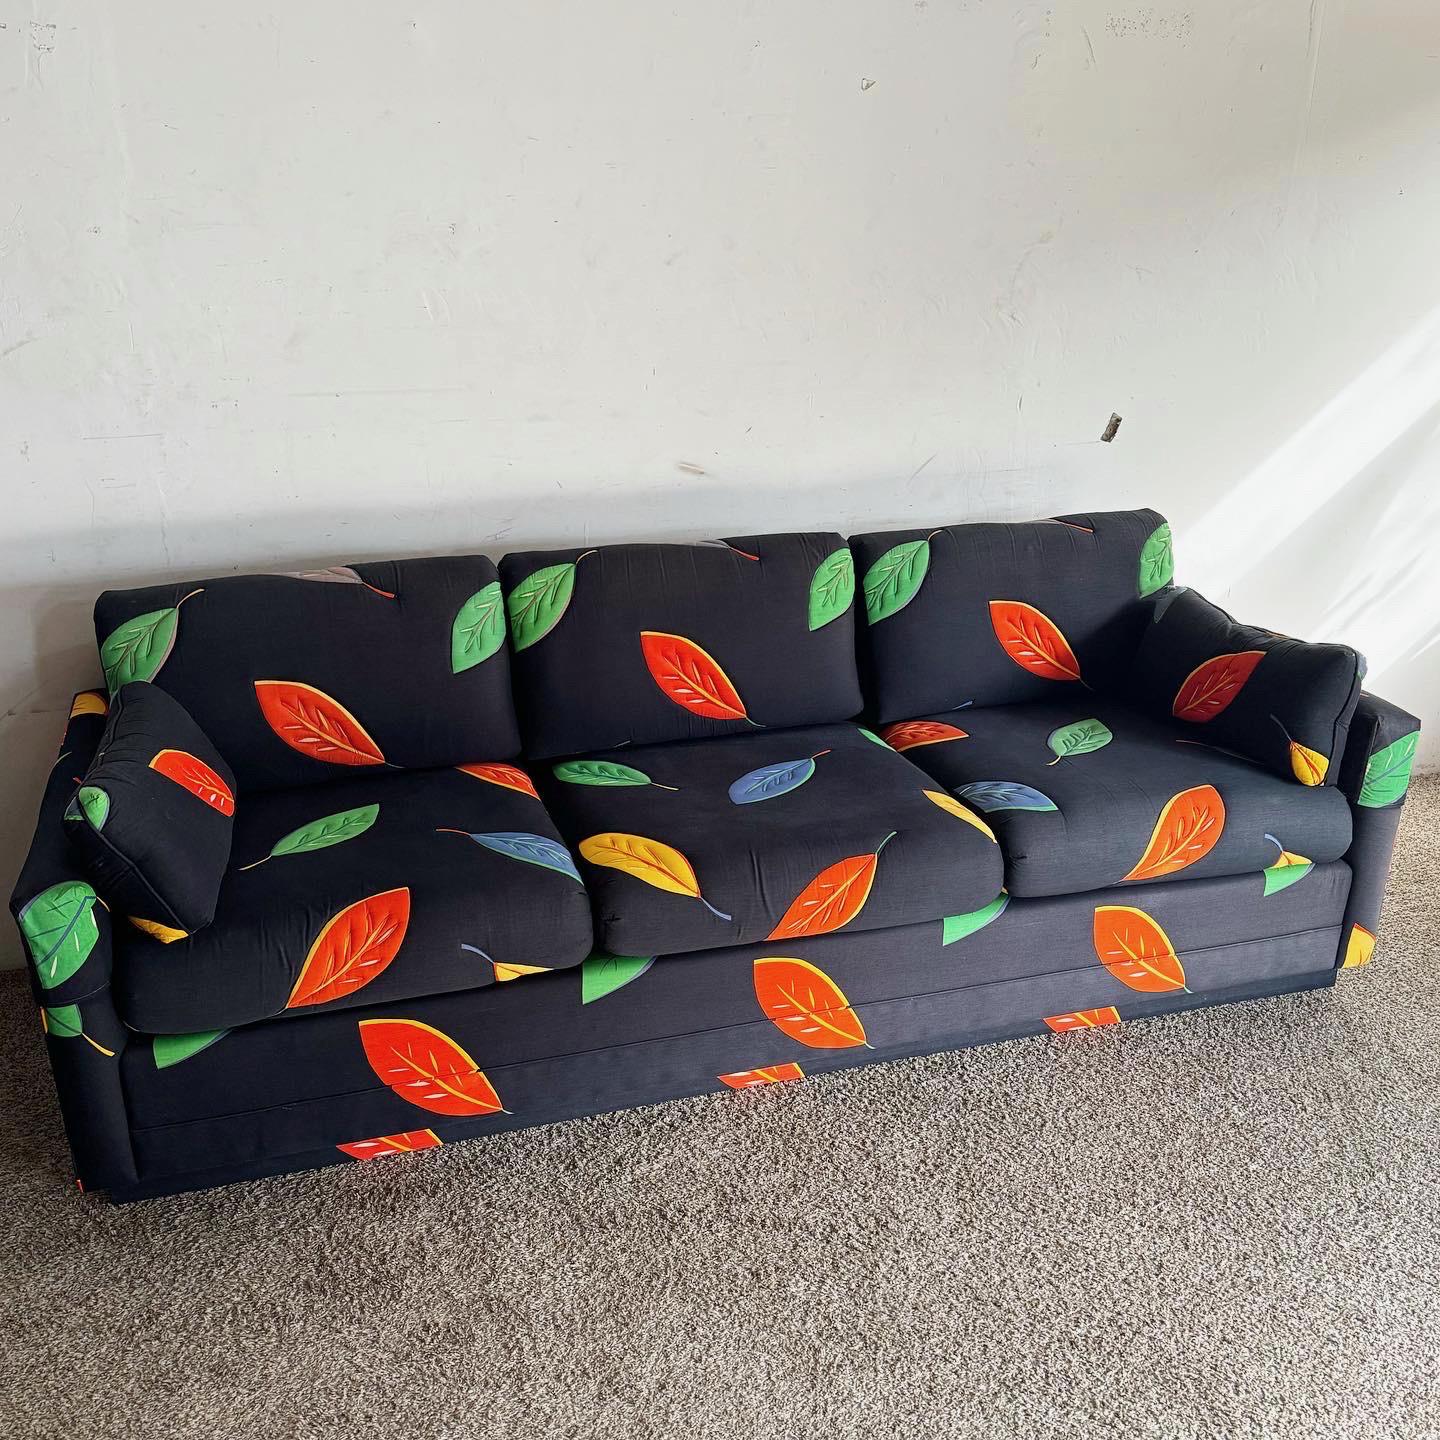 The Postmodern Multi Color Leaf/Black Fabric Sofa is a dynamic addition to any modern space. Featuring a vibrant leaf pattern against a black backdrop, this sofa combines postmodern style with comfort, perfect for creating a lively focal point in